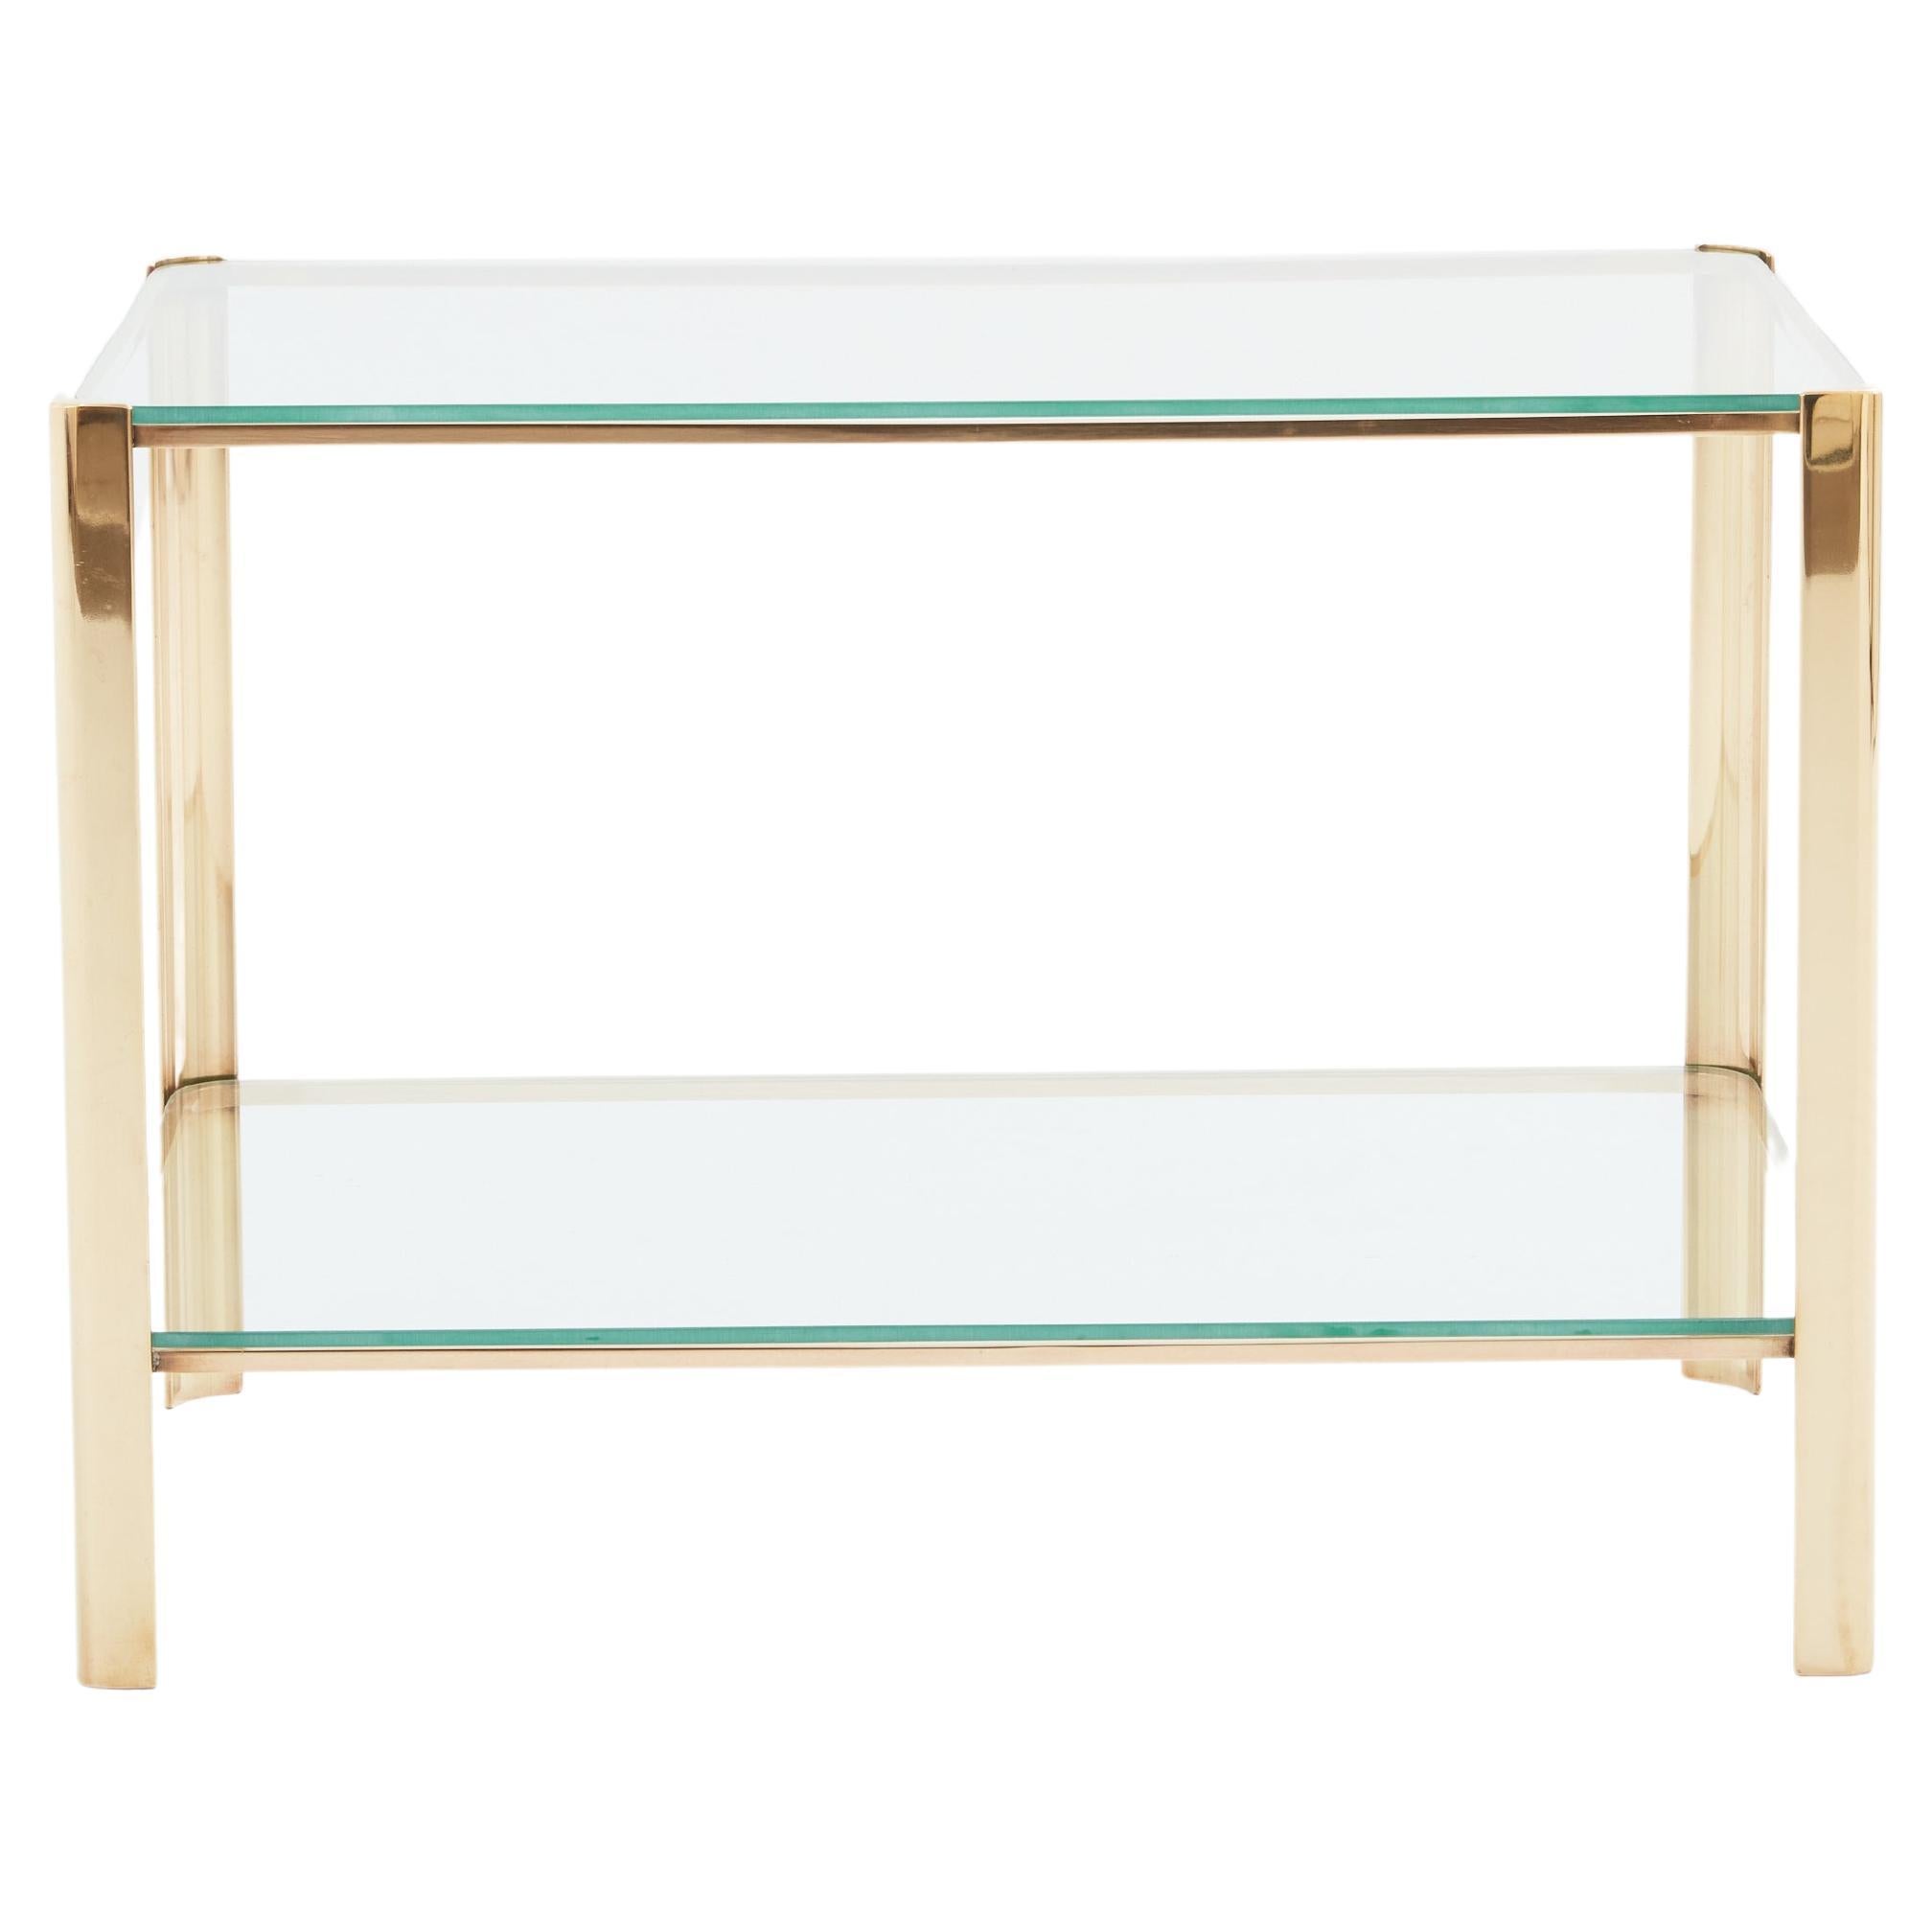 Two-tier Bronze glass side table by Jacques Quinet for Broncz 1960s